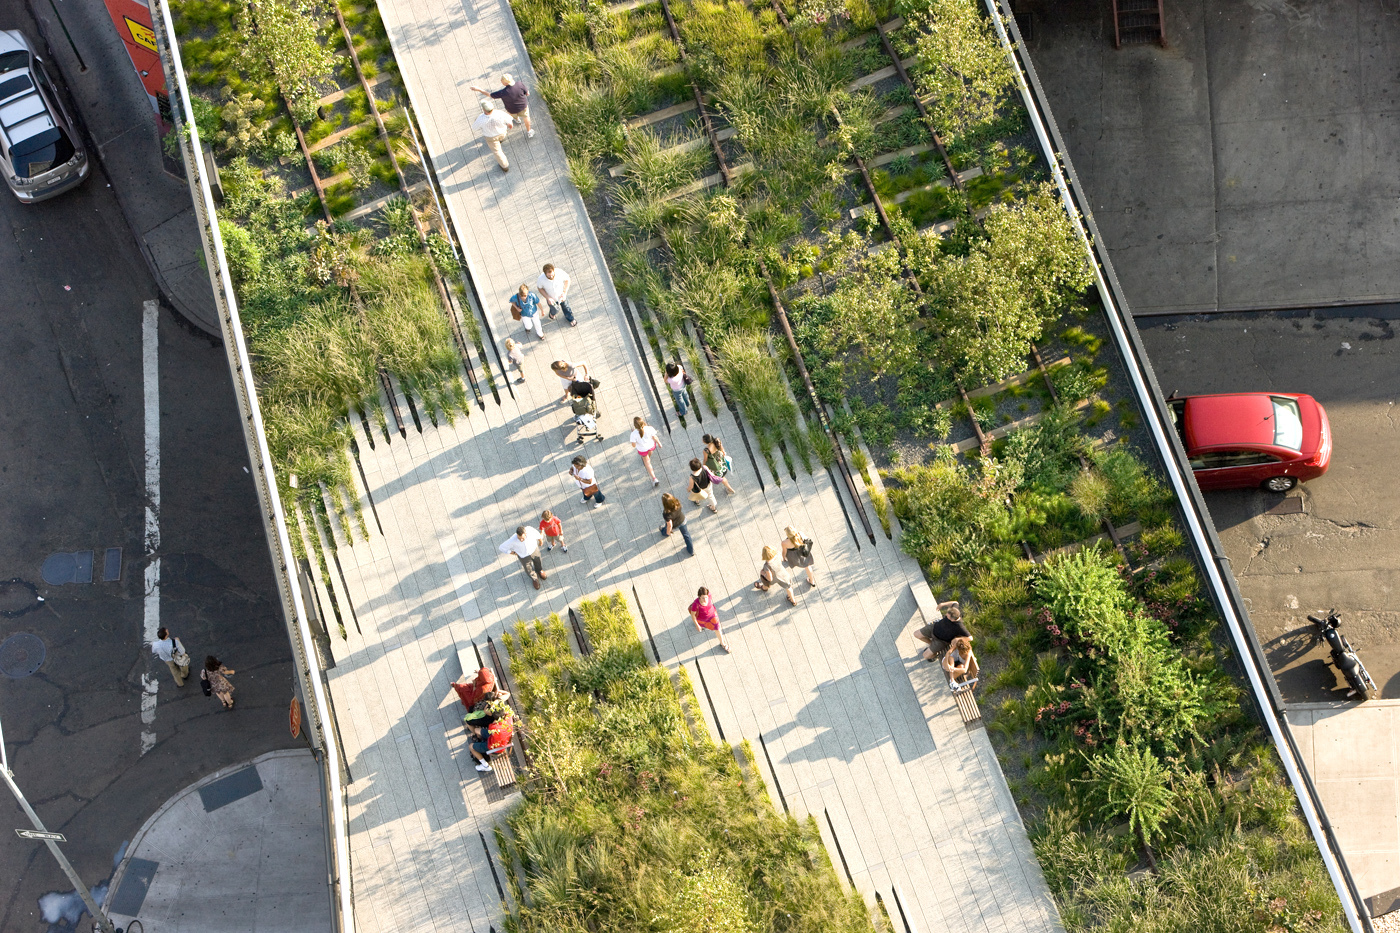 The New York City High Line: a converted elevated rail system now boasting a verdant, green walkway snaking through the harsh urban landscape while also helping to collect and retain storm water.